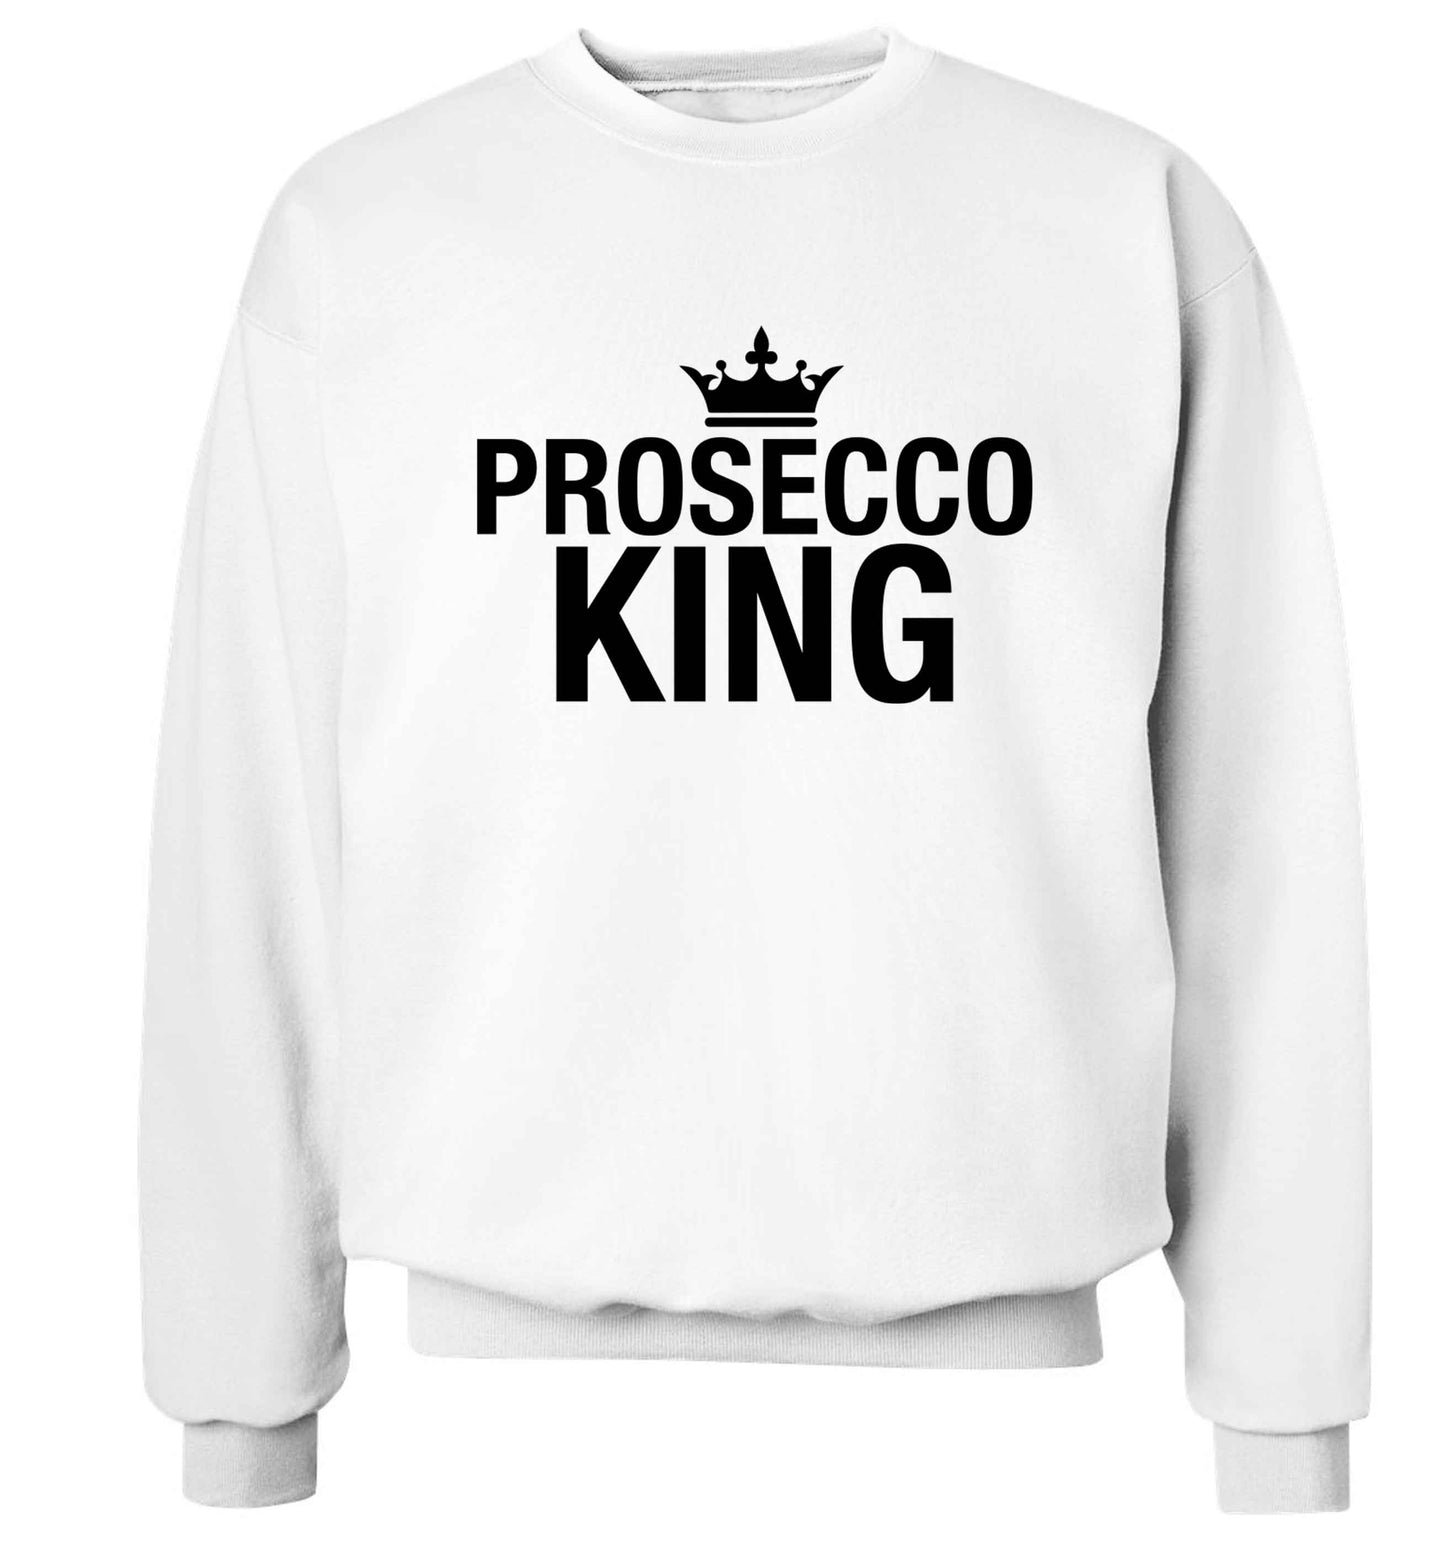 Prosecco king Adult's unisex white Sweater 2XL